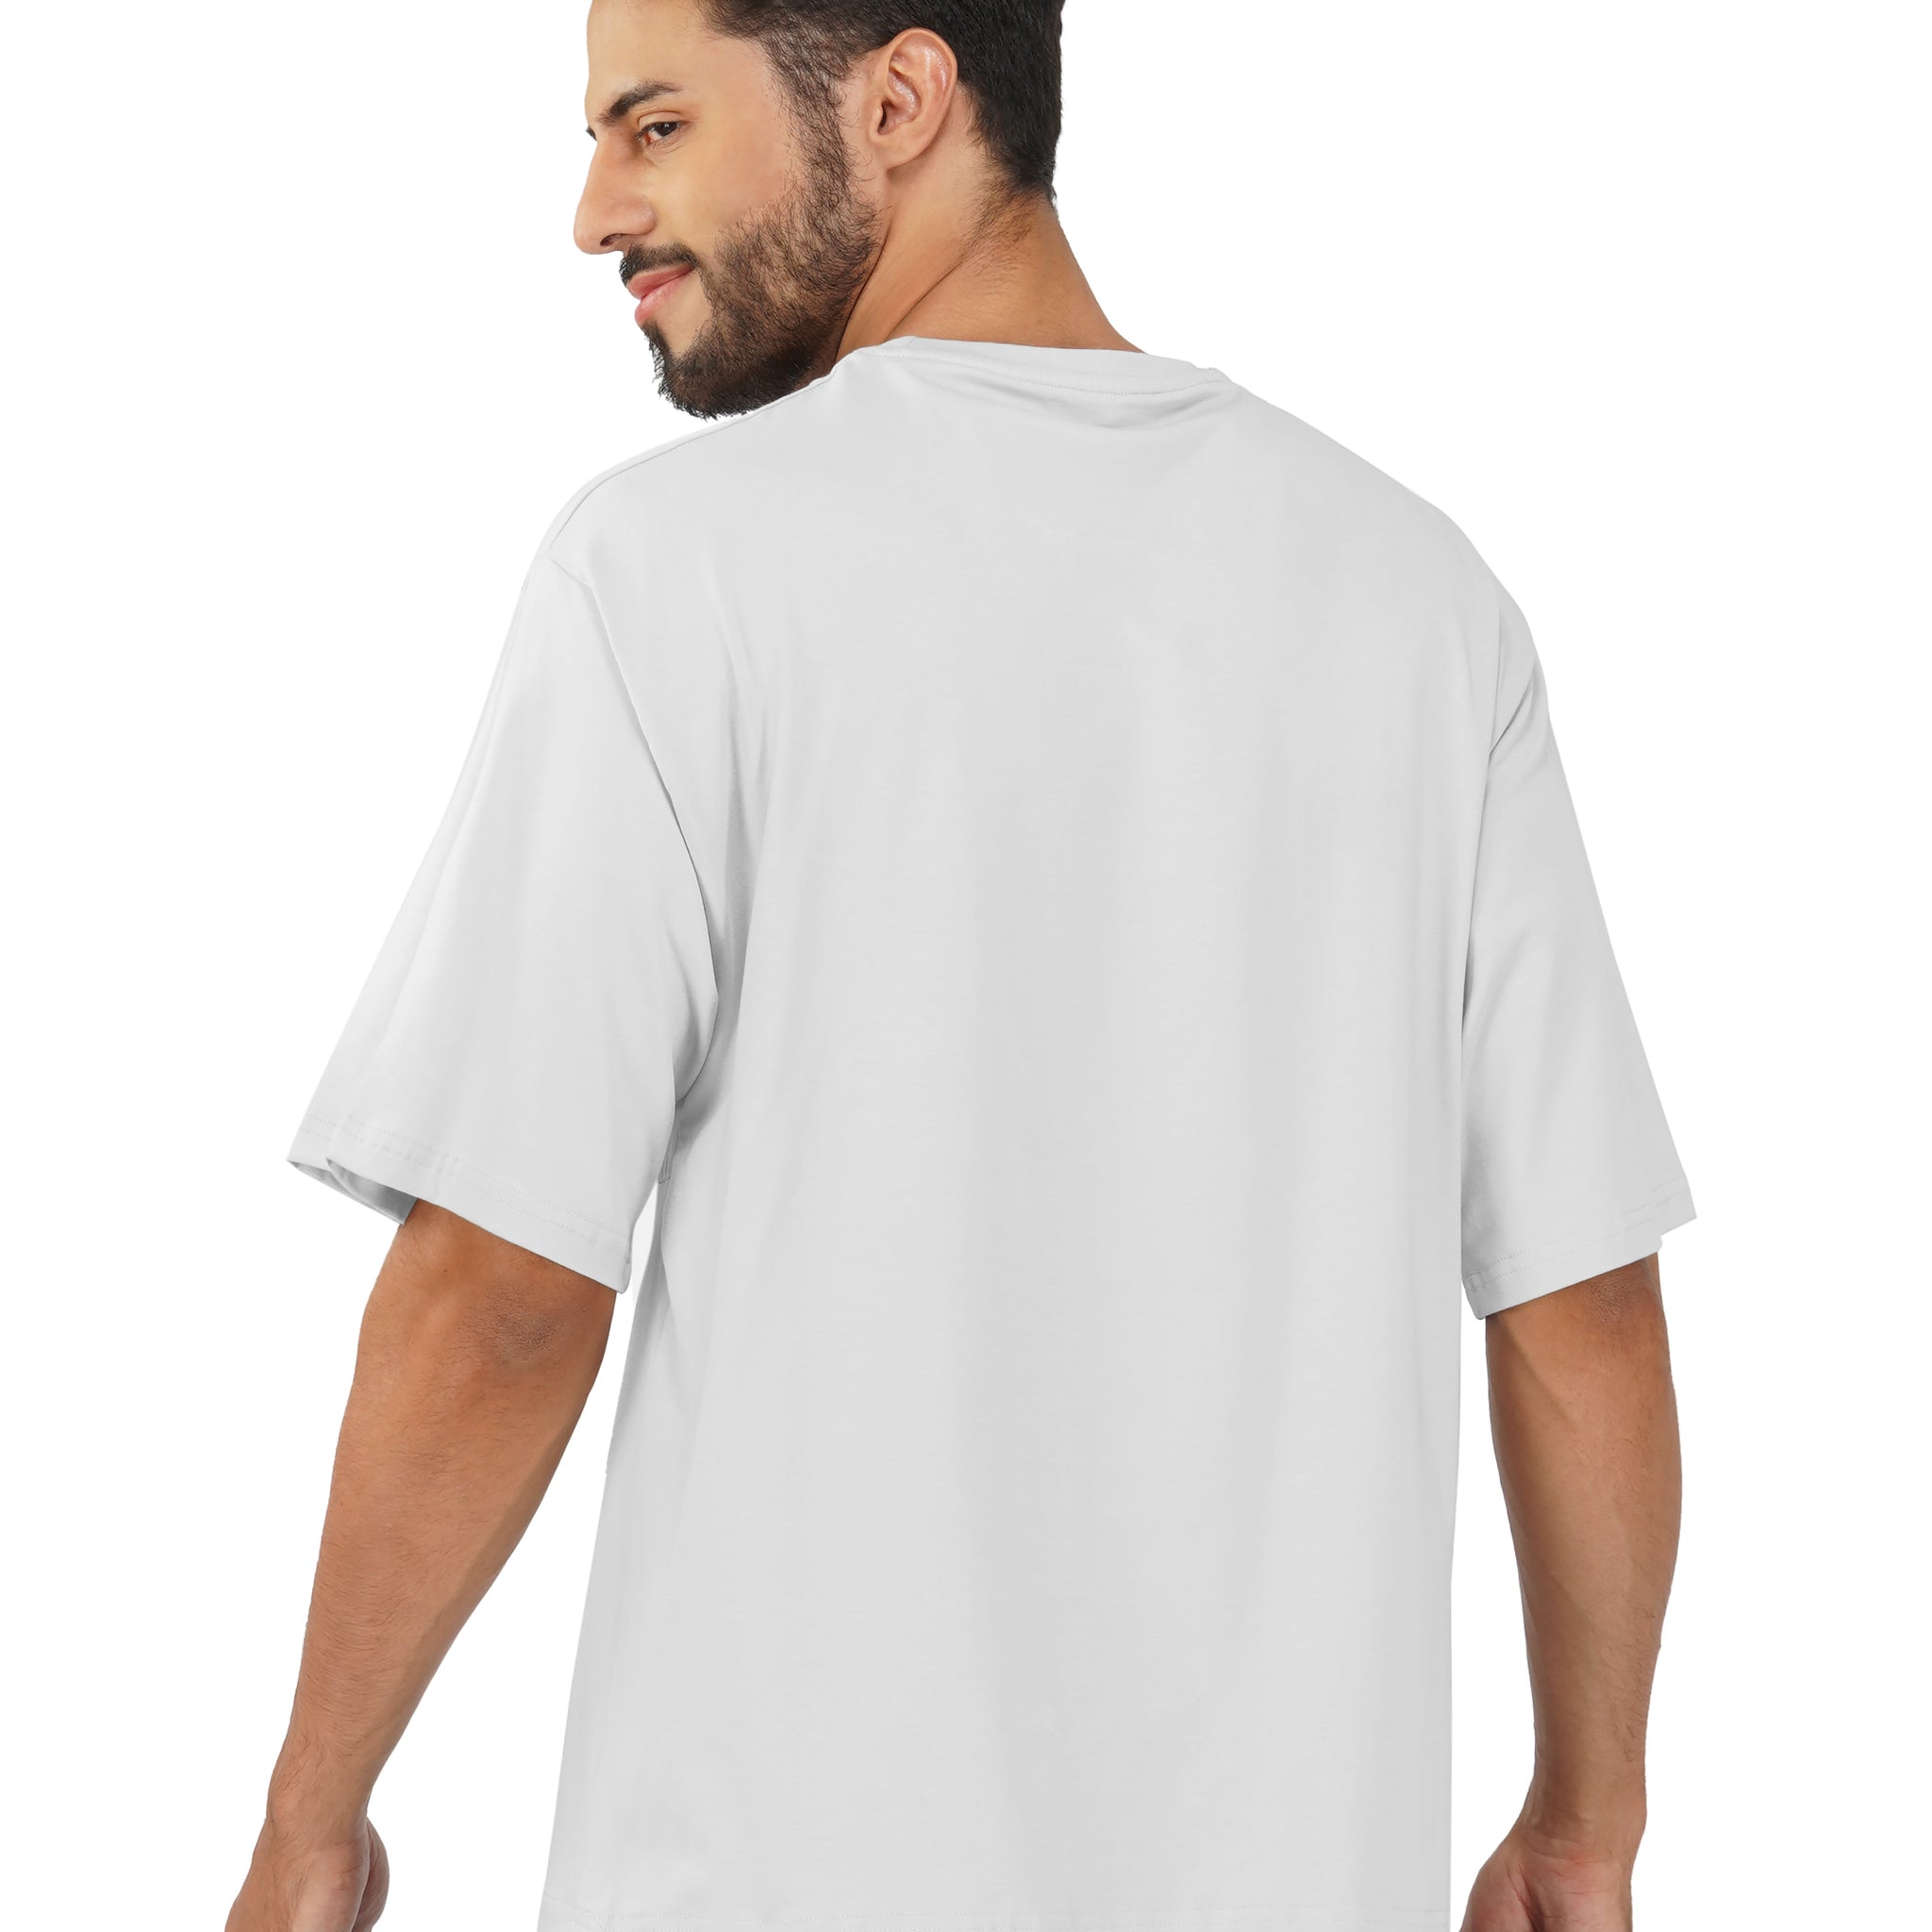 SOLID WHITE COLORED ROUND NECK DROP SHOULDER TSHIRT